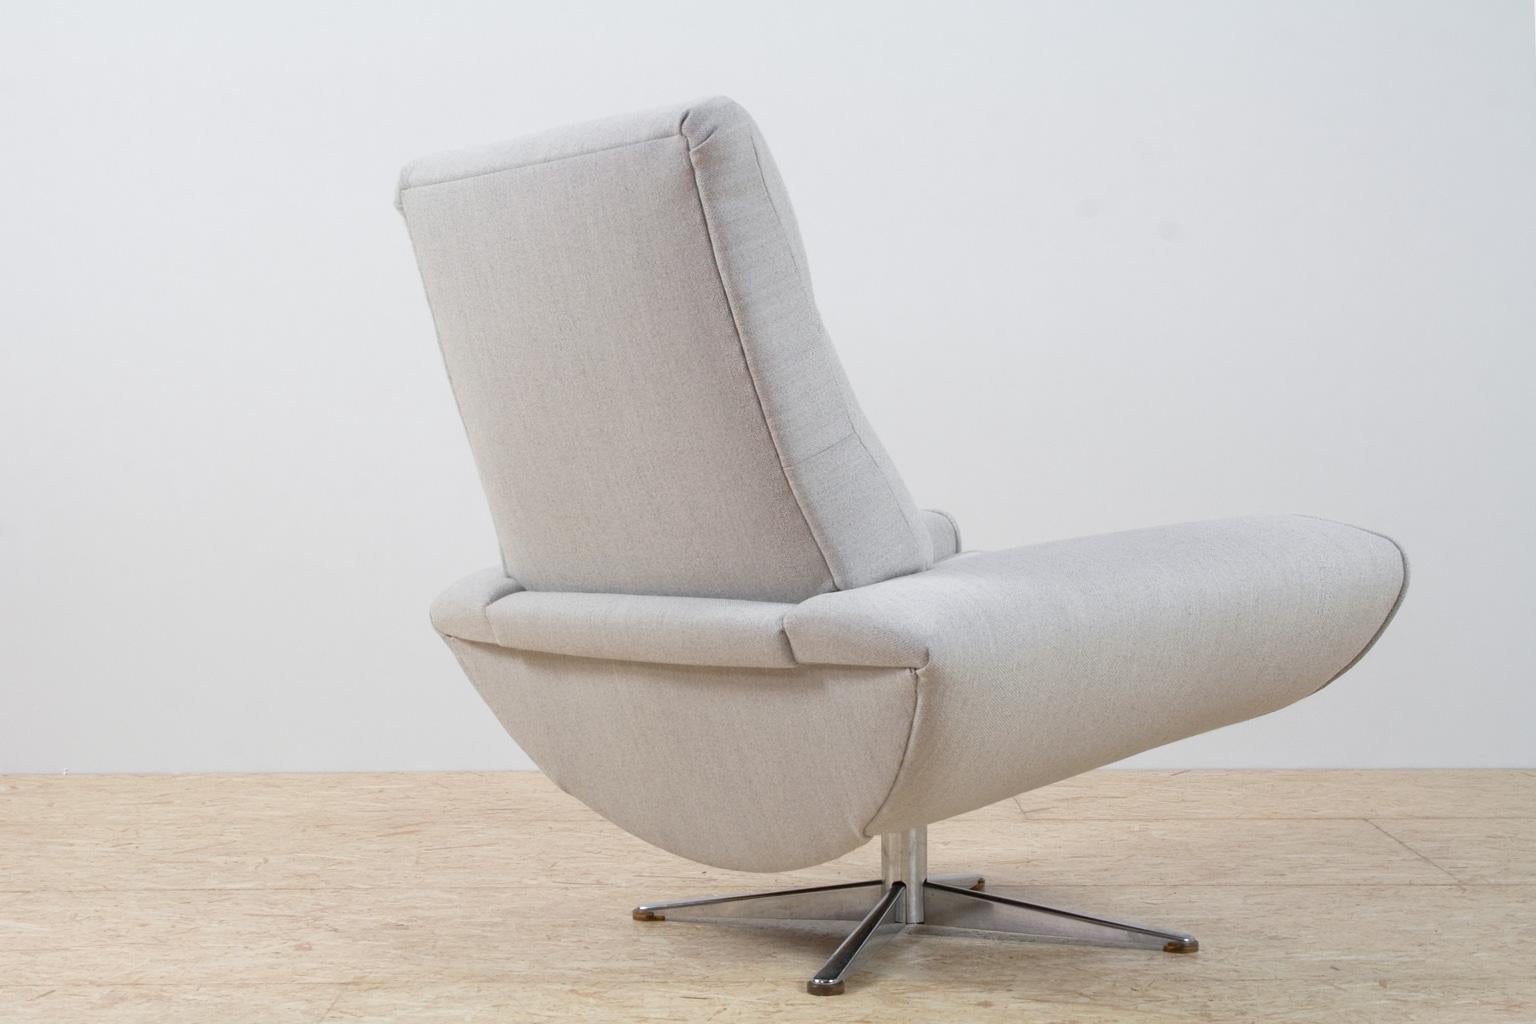 Beautiful Scandinavian Modern 'Capri' swivel lounge chair with a high back designed by Johannes Andersen for Trensum (Sweden) in 1958. The item is re-upholstered in a light grey wool quality fabric, and placed on a chromed swivel frame.

The item